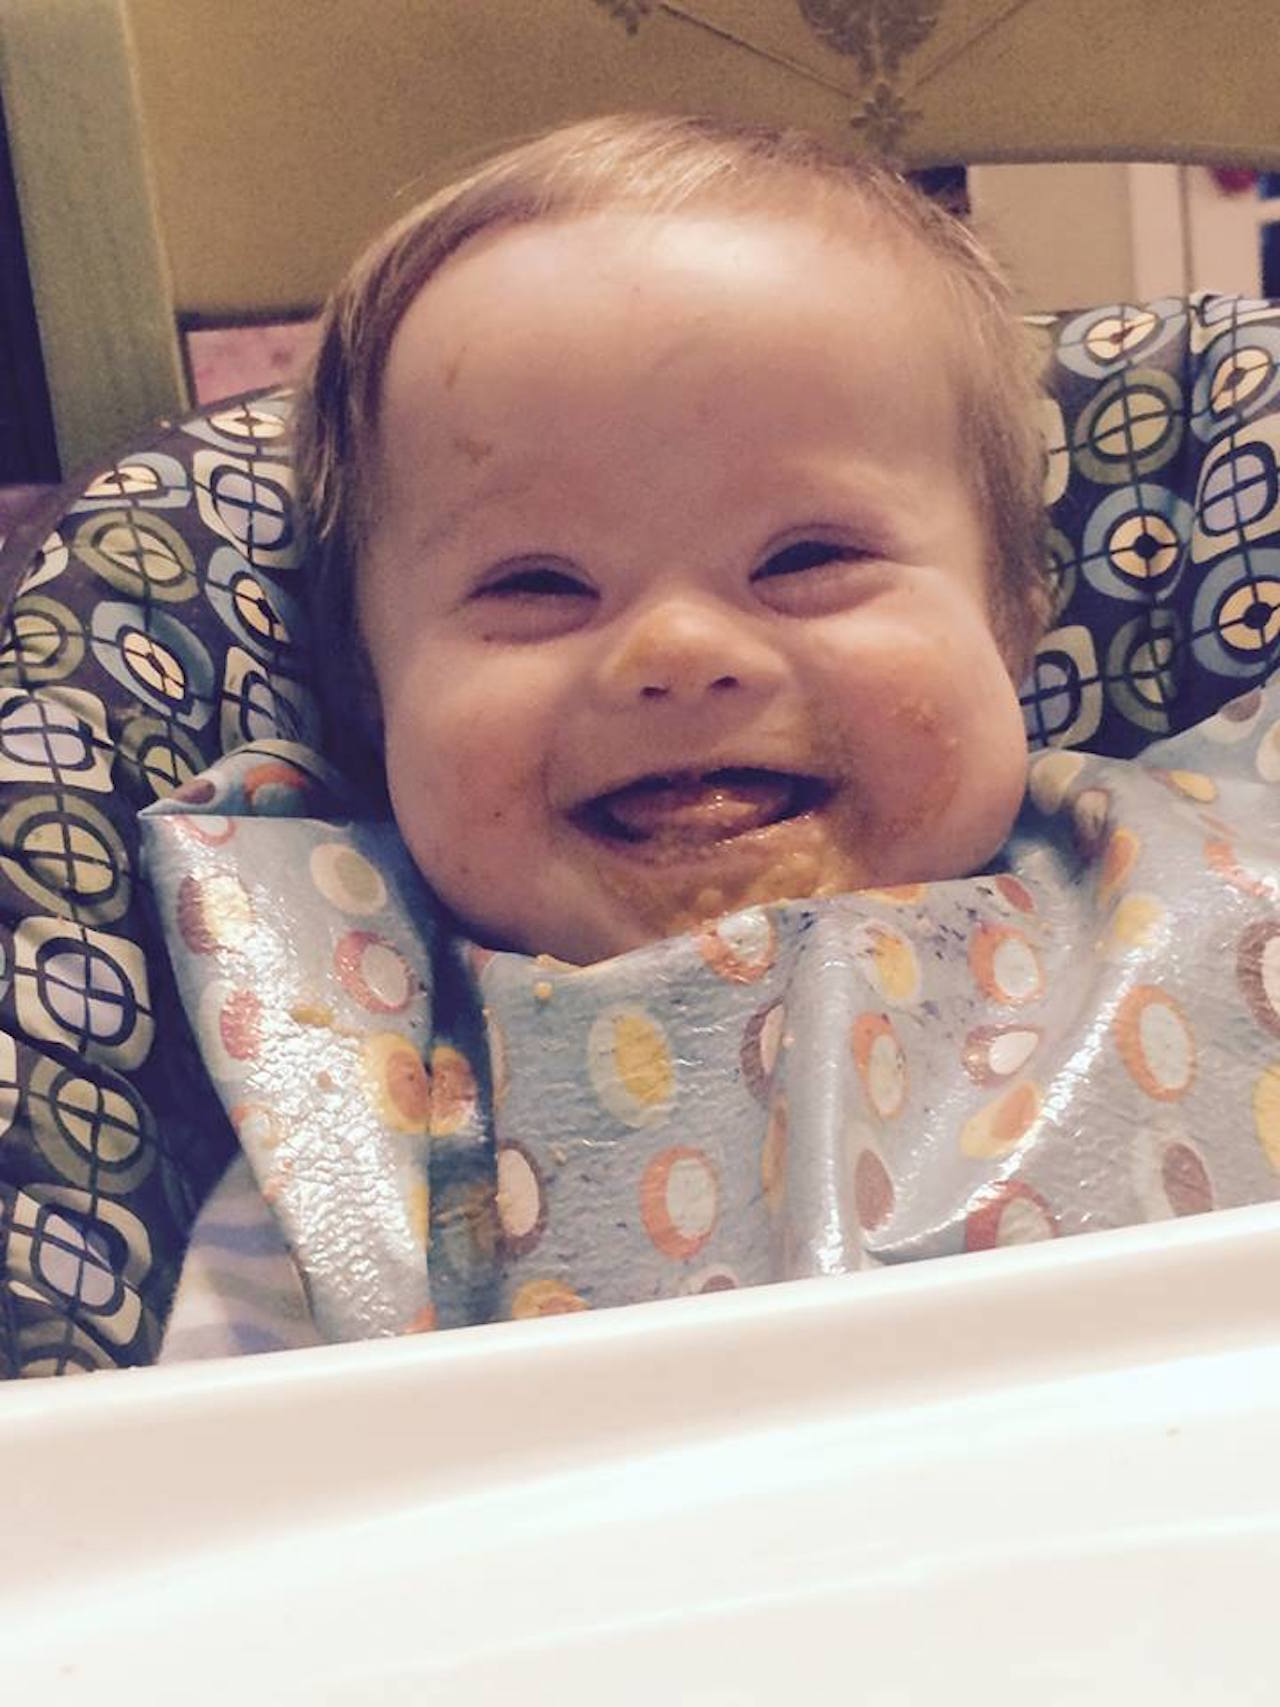 baby with down syndrome eating cake